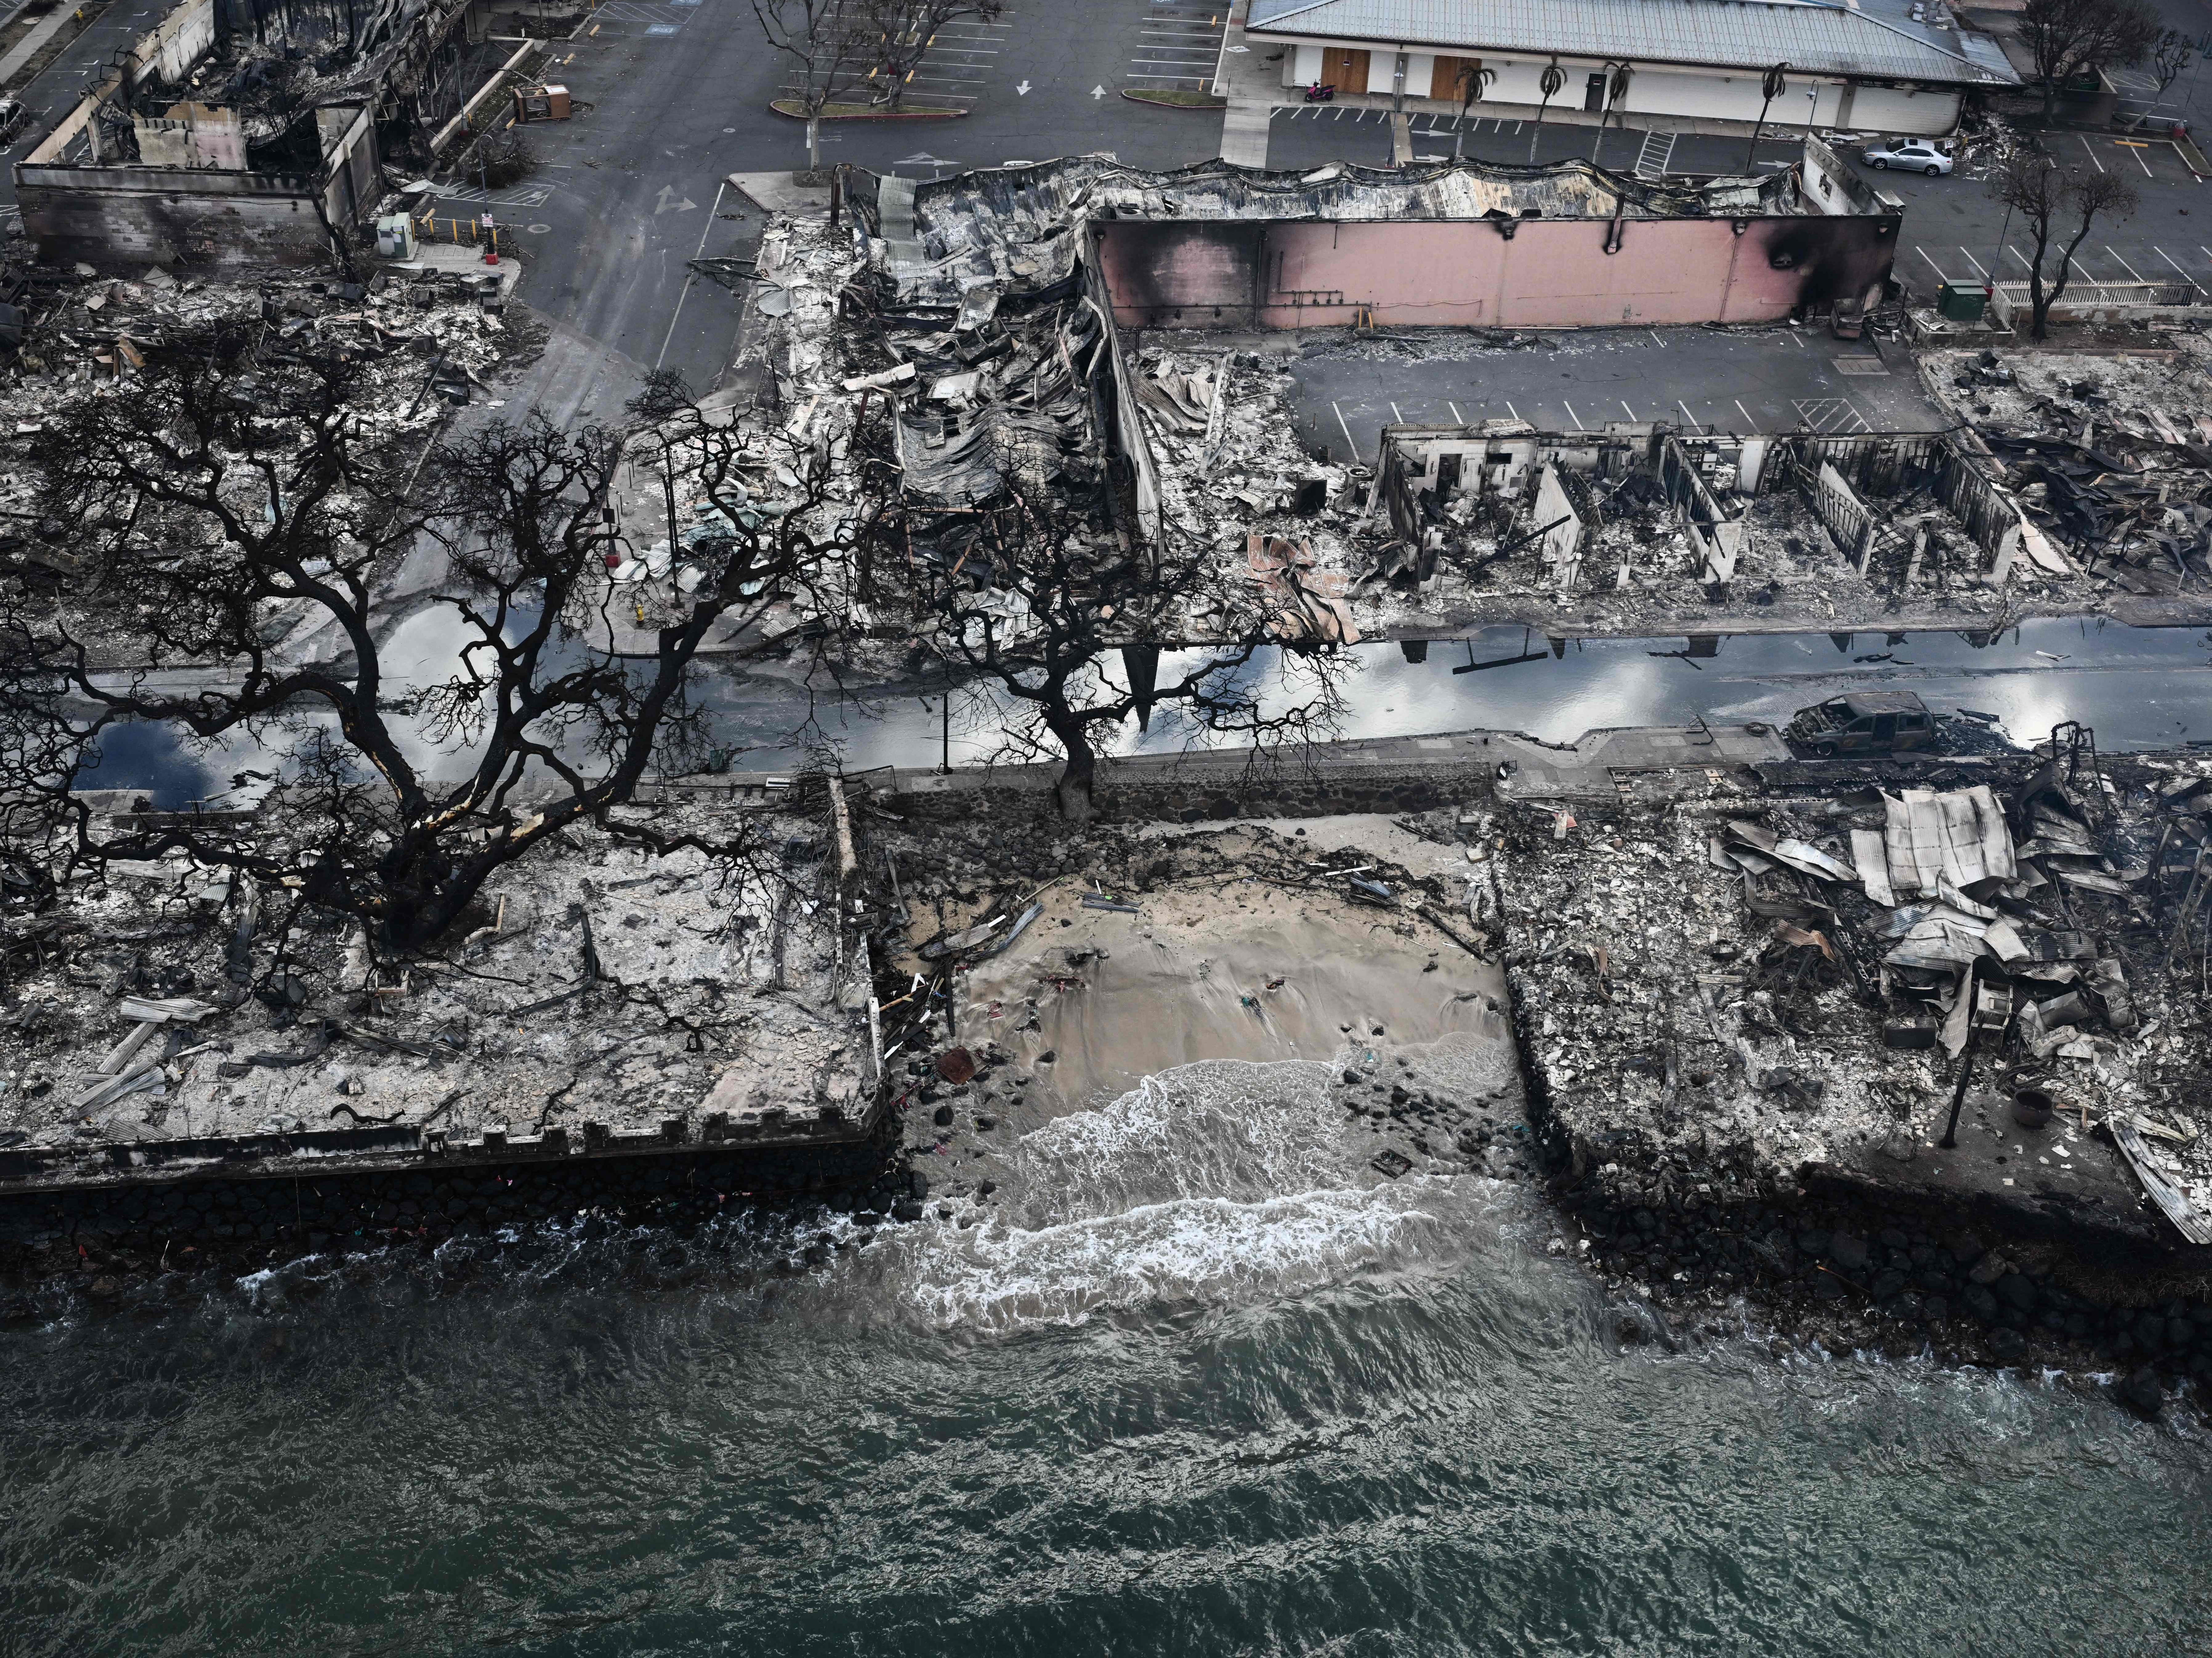 Destroyed homes and buildings on the waterfront in Maui